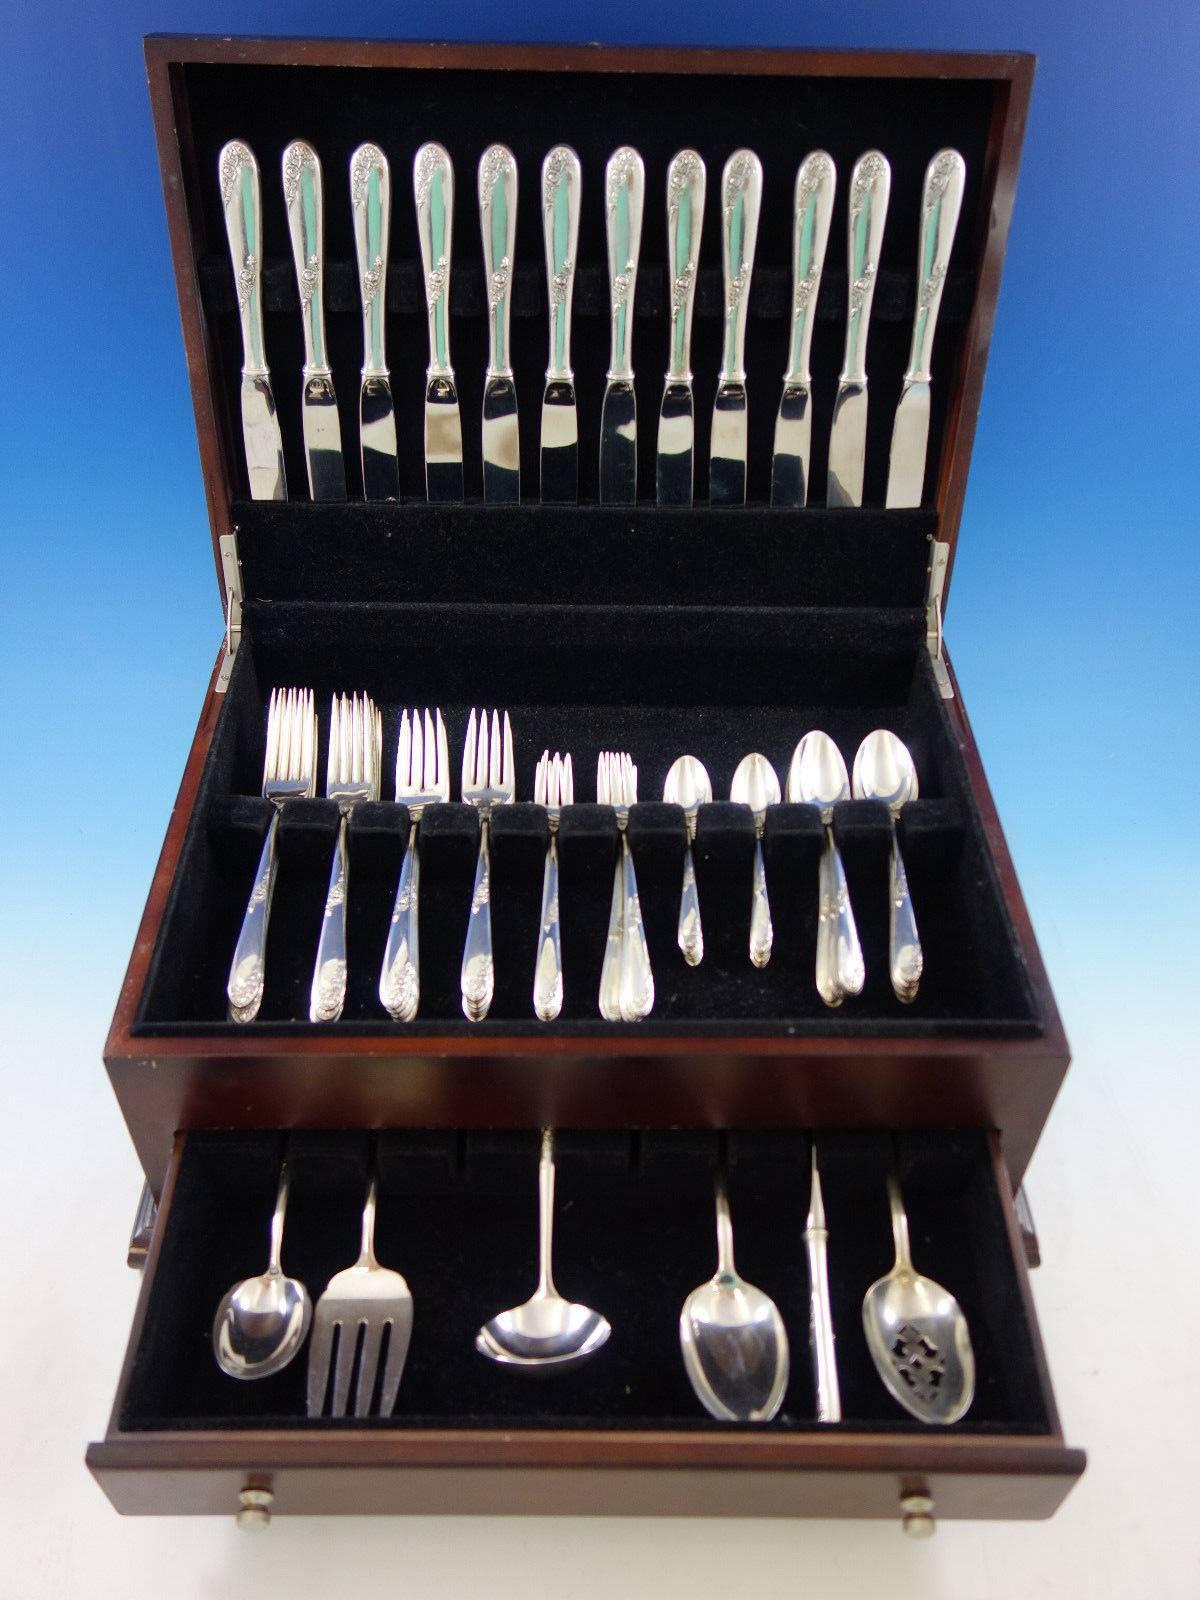 Sweetheart Rose by Lunt sterling silver flatware set, 78 pieces. This set includes: 

12 knives, 8 3/4